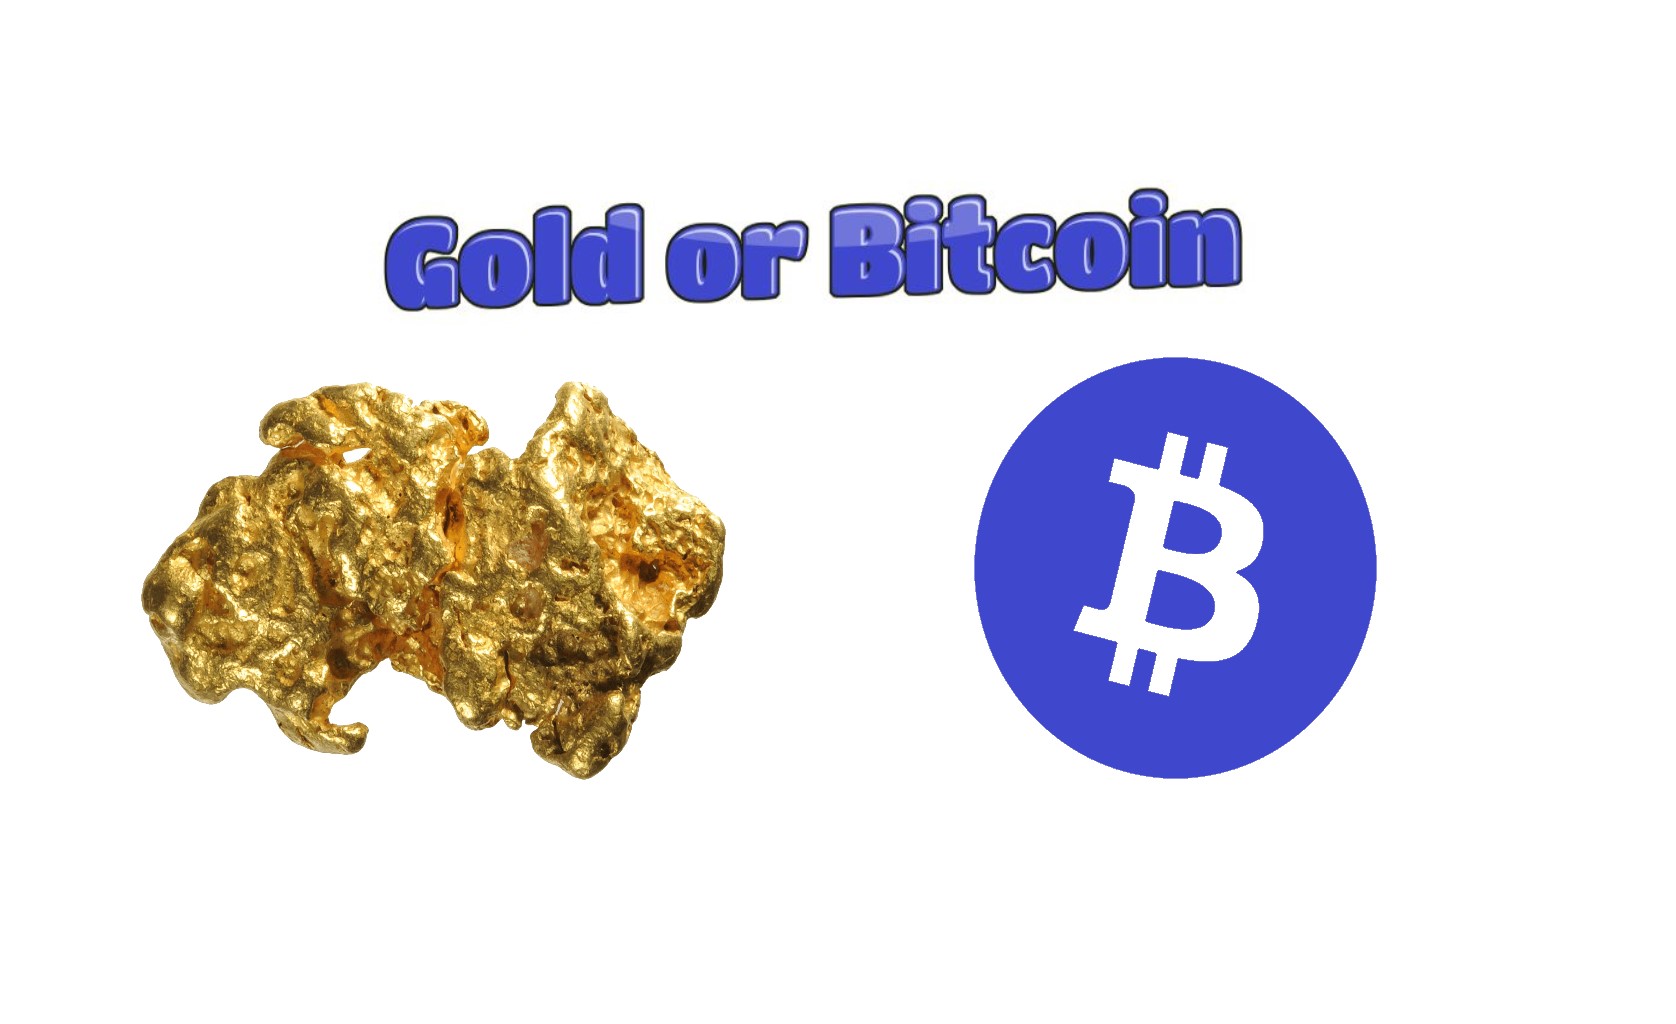 The rush to gold or bitcoin 